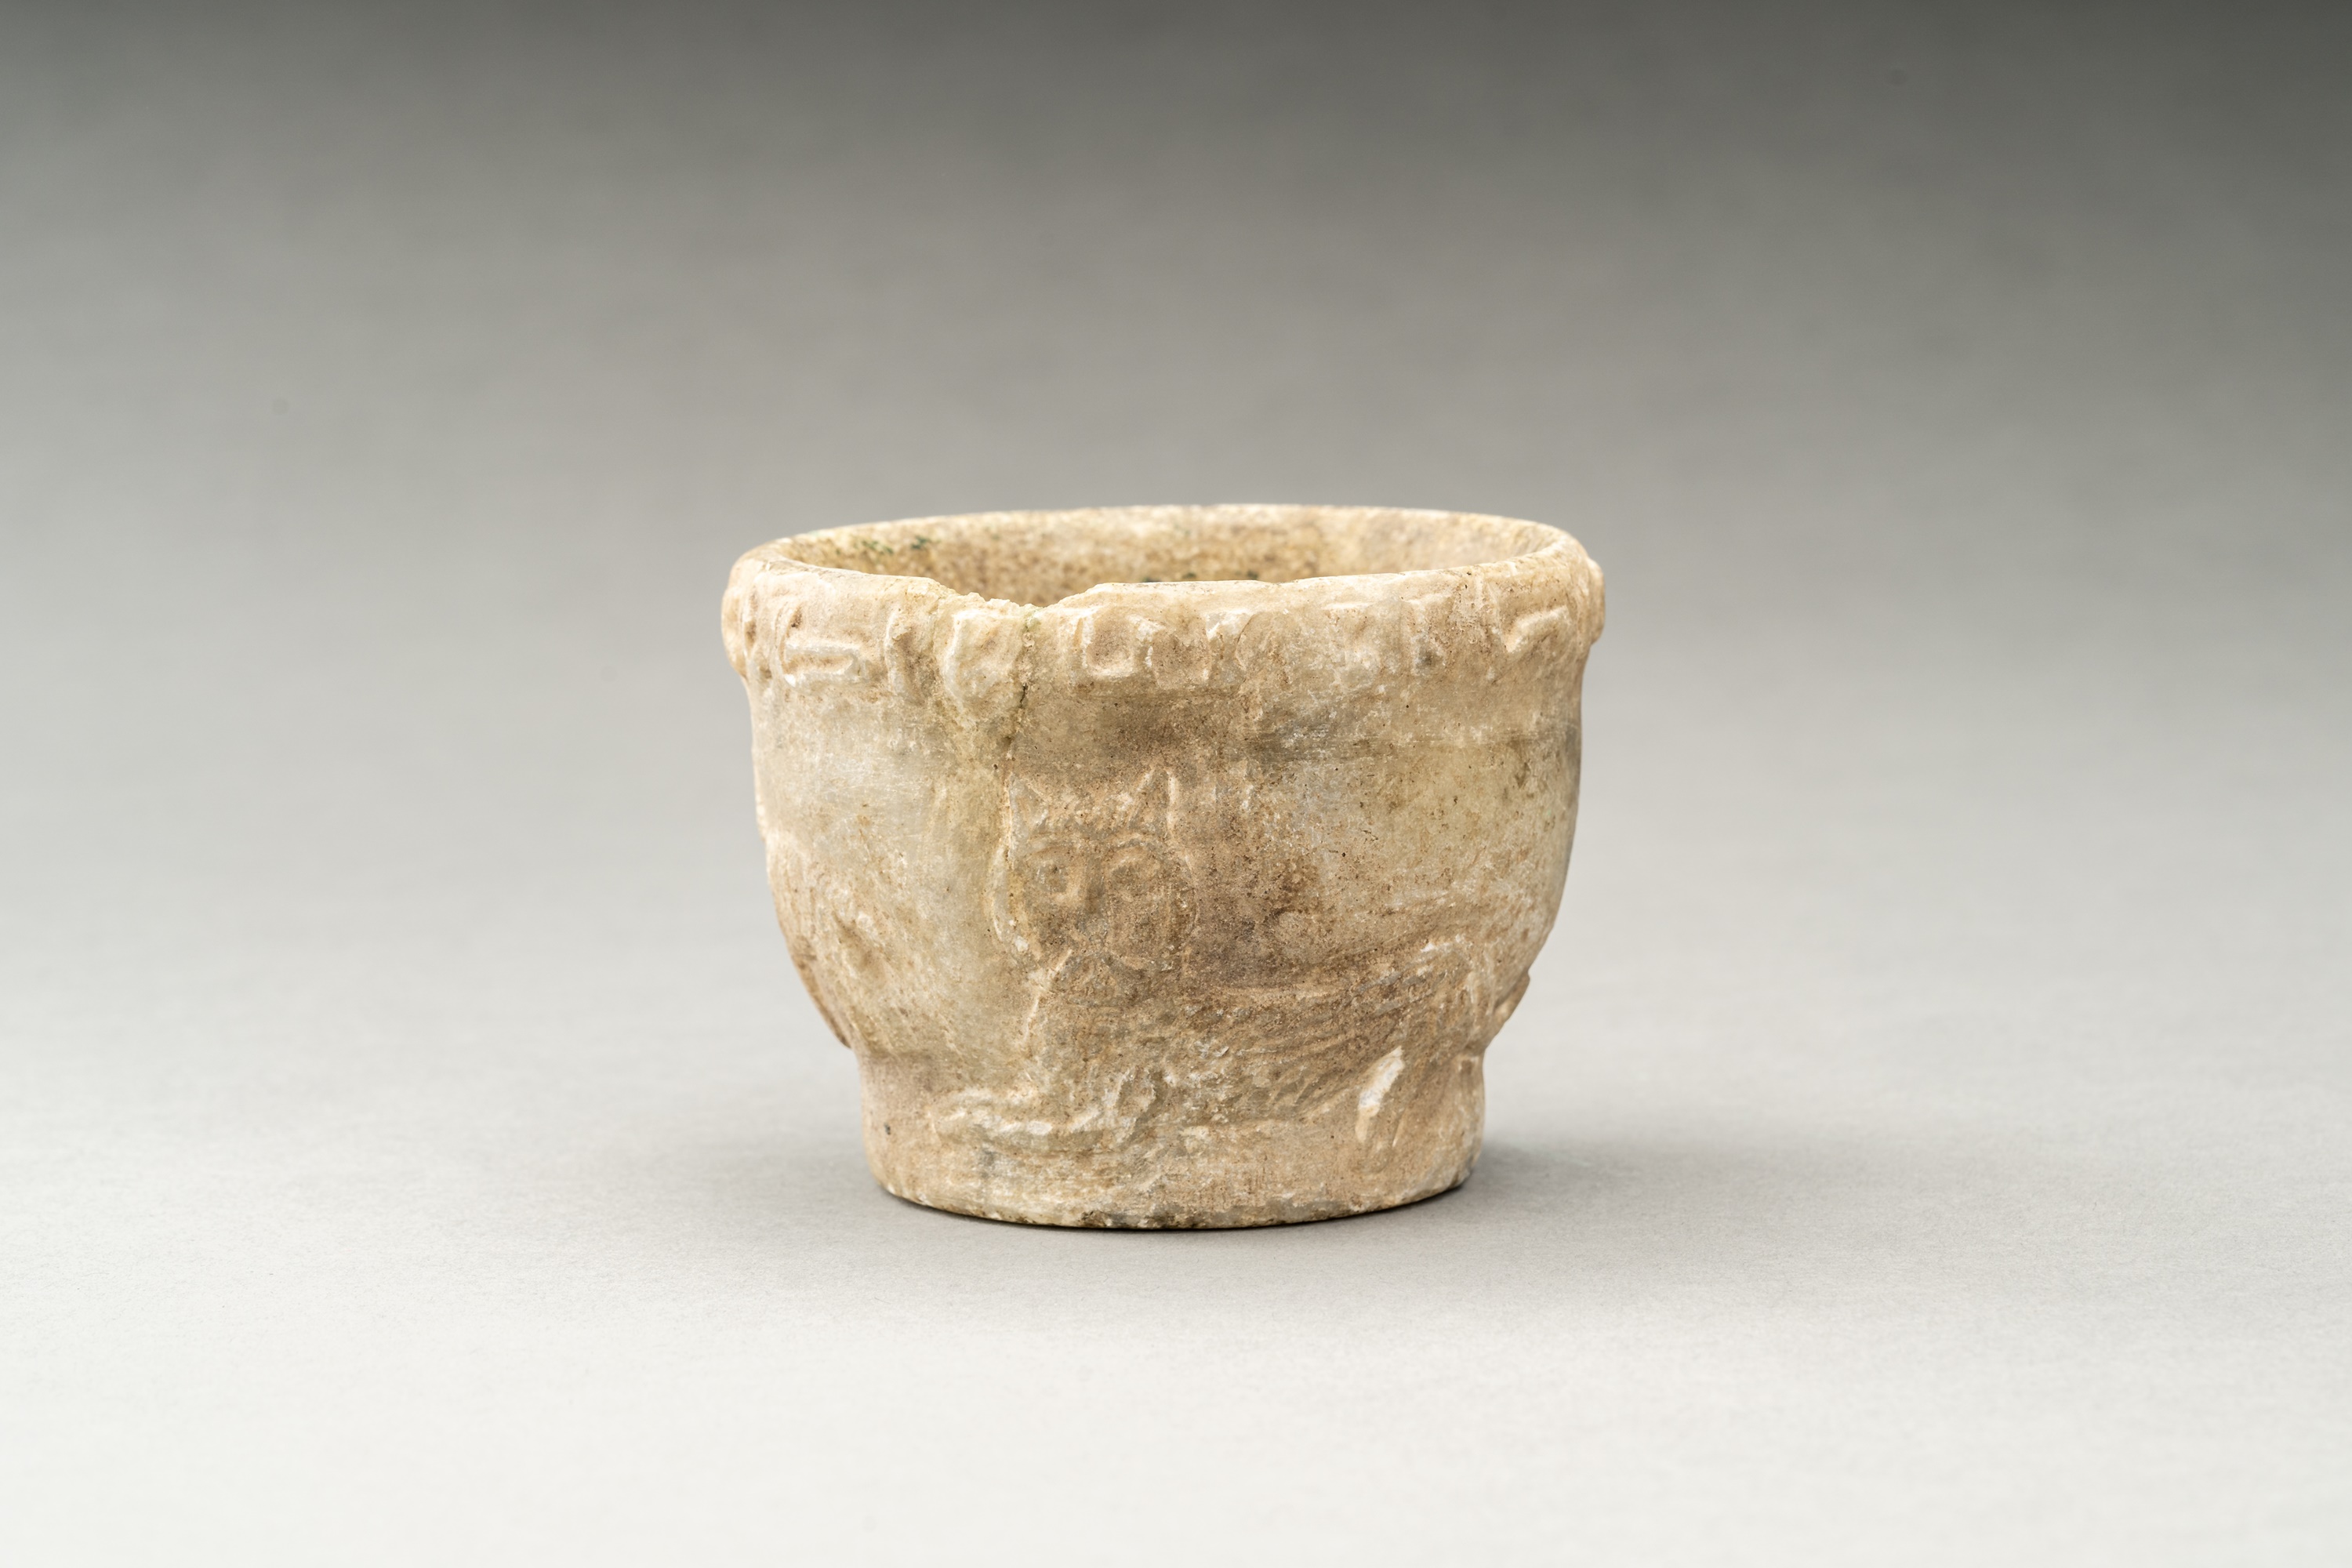 A WESTERN ASIATIC MARBLE BOWL, 3RD MILLENNIUM BC - Image 5 of 8